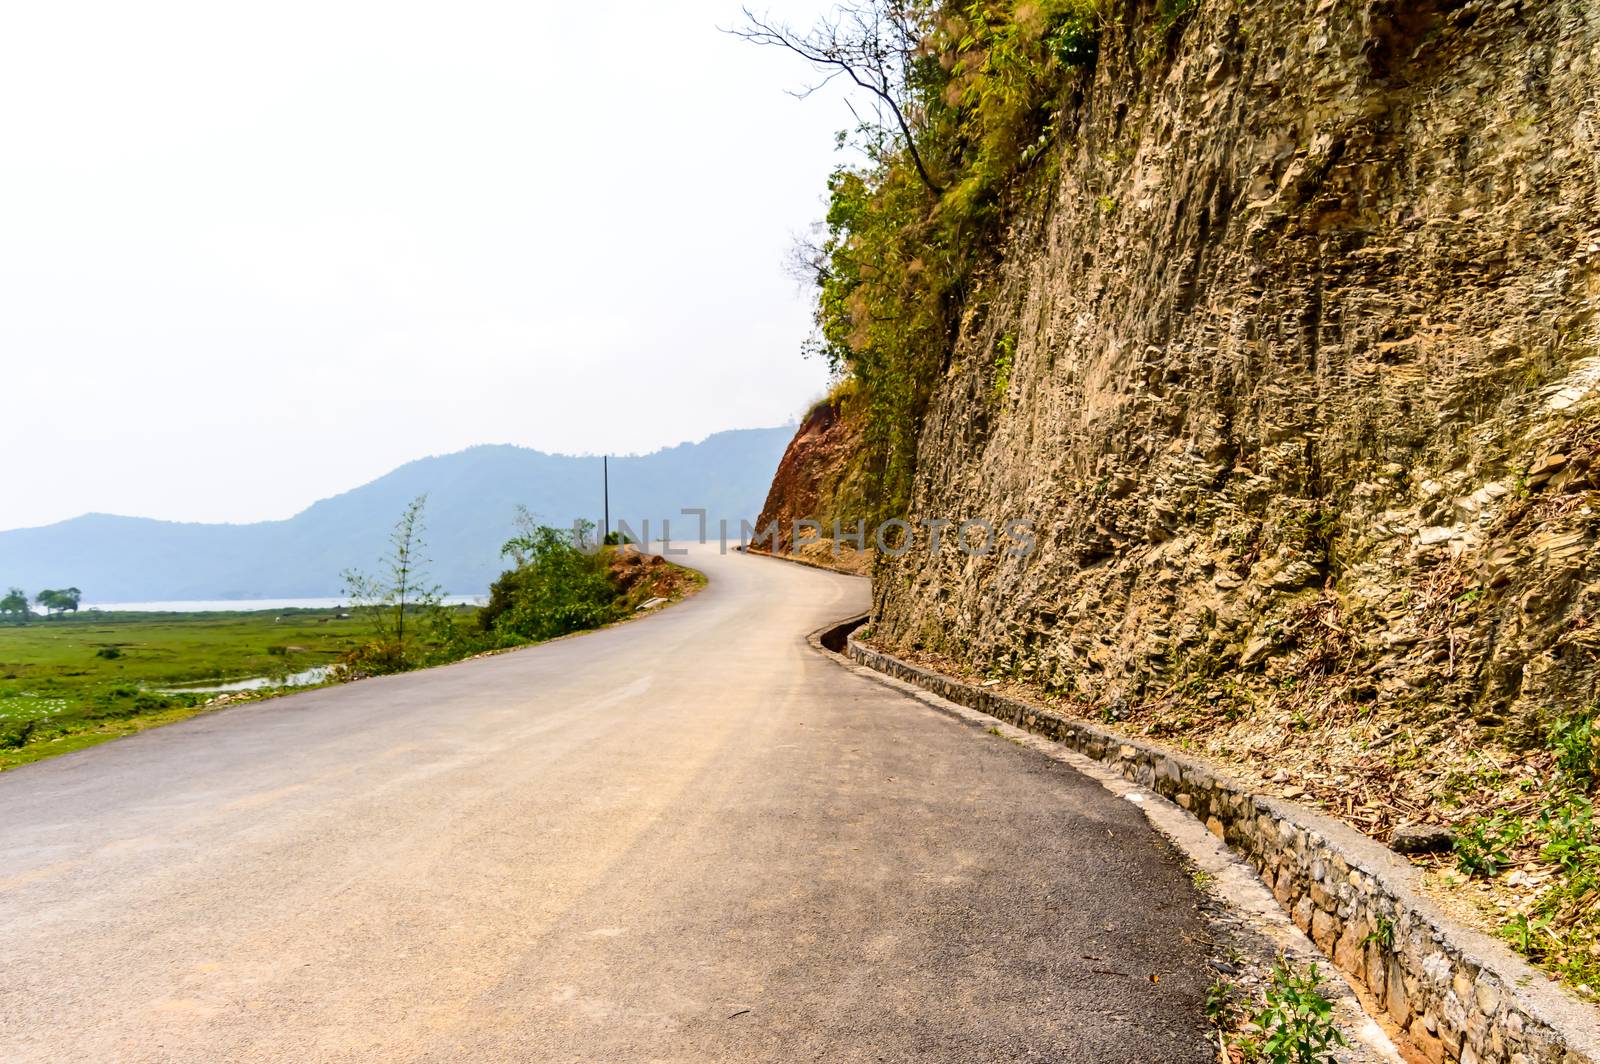 Photograph of empty road with hill in surrounding near Pokhara Lake at Kathmandu Nepal. Snap in portrait, landscape, wide screen style. Vintage film look. Vacation Freedom, Simplicity Concept. by sudiptabhowmick